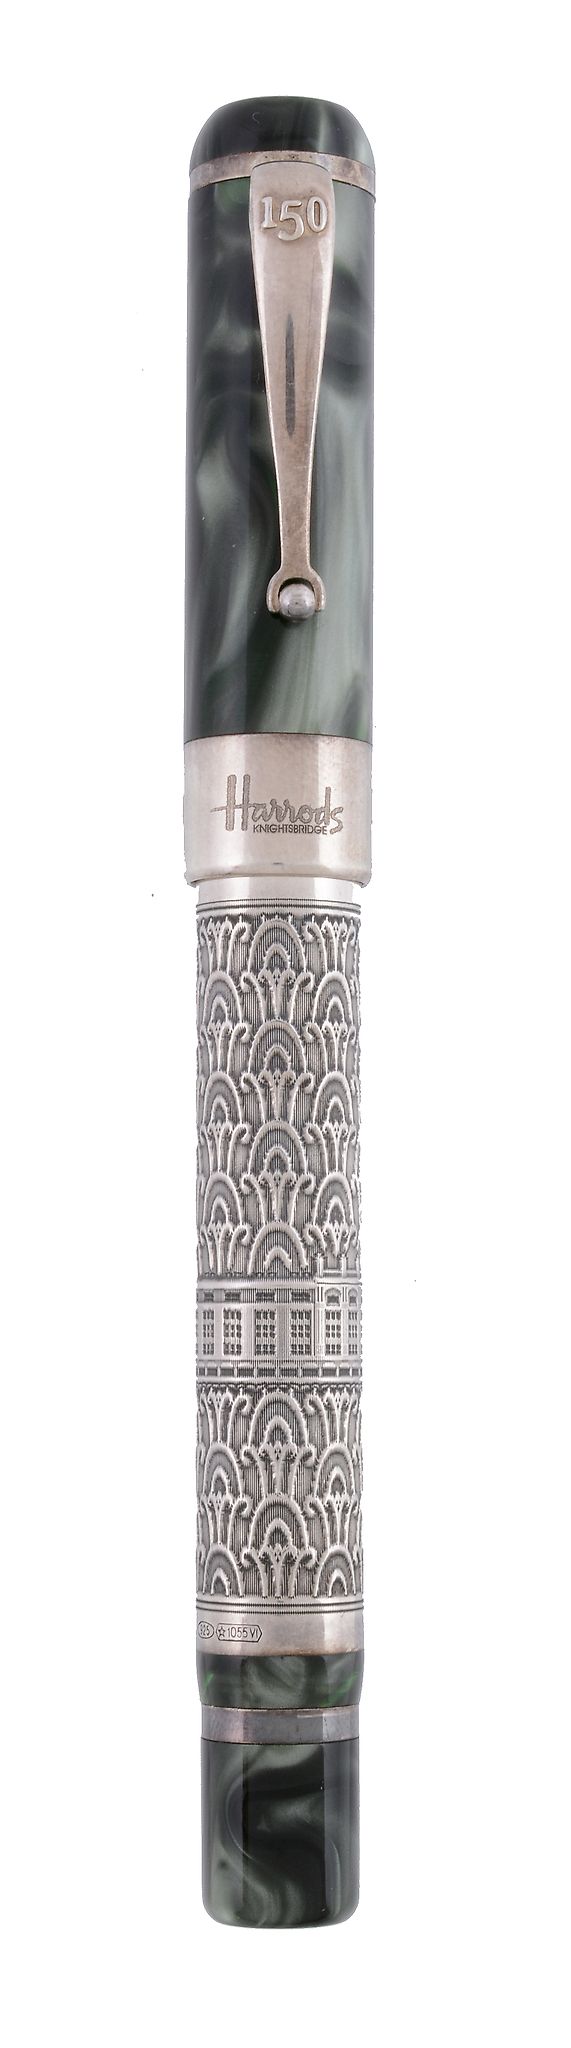 Montegrappa, Harrods, a limited edition ballpoint pen,   1849-1999 Celebrating 150 years, a limited